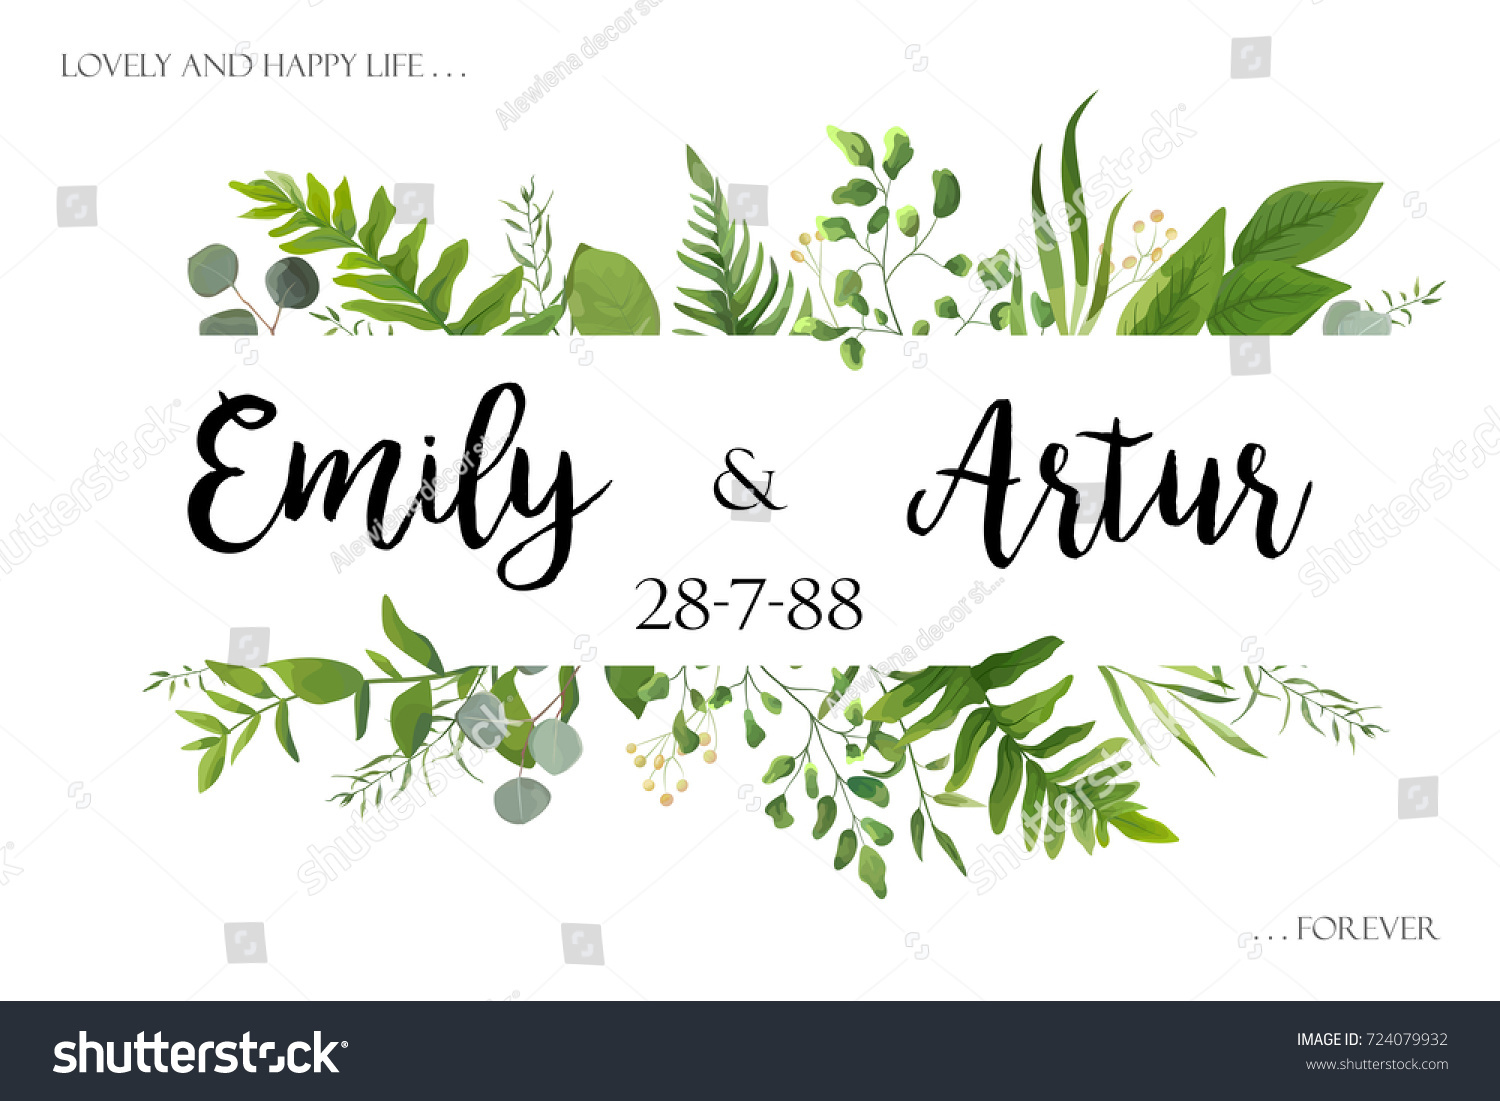 Wedding invite invitation card vector floral greenery design: Forest fern frond, Eucalyptus branch green leaves foliage herb greenery, berry frame, border. Poster, greeting Watercolor art illustration #724079932